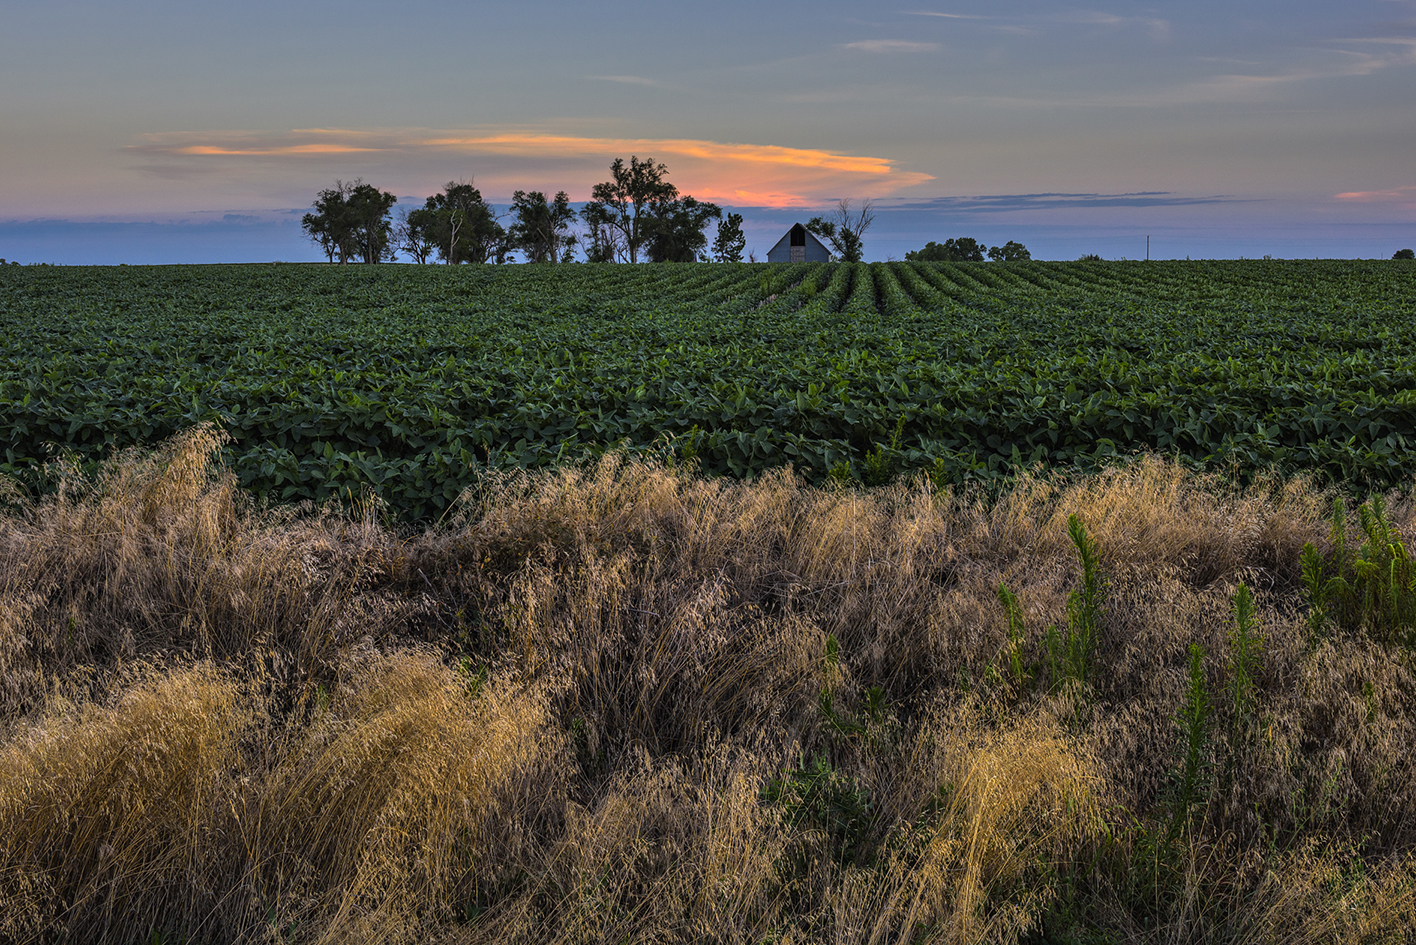 Twilight in the Beanfield